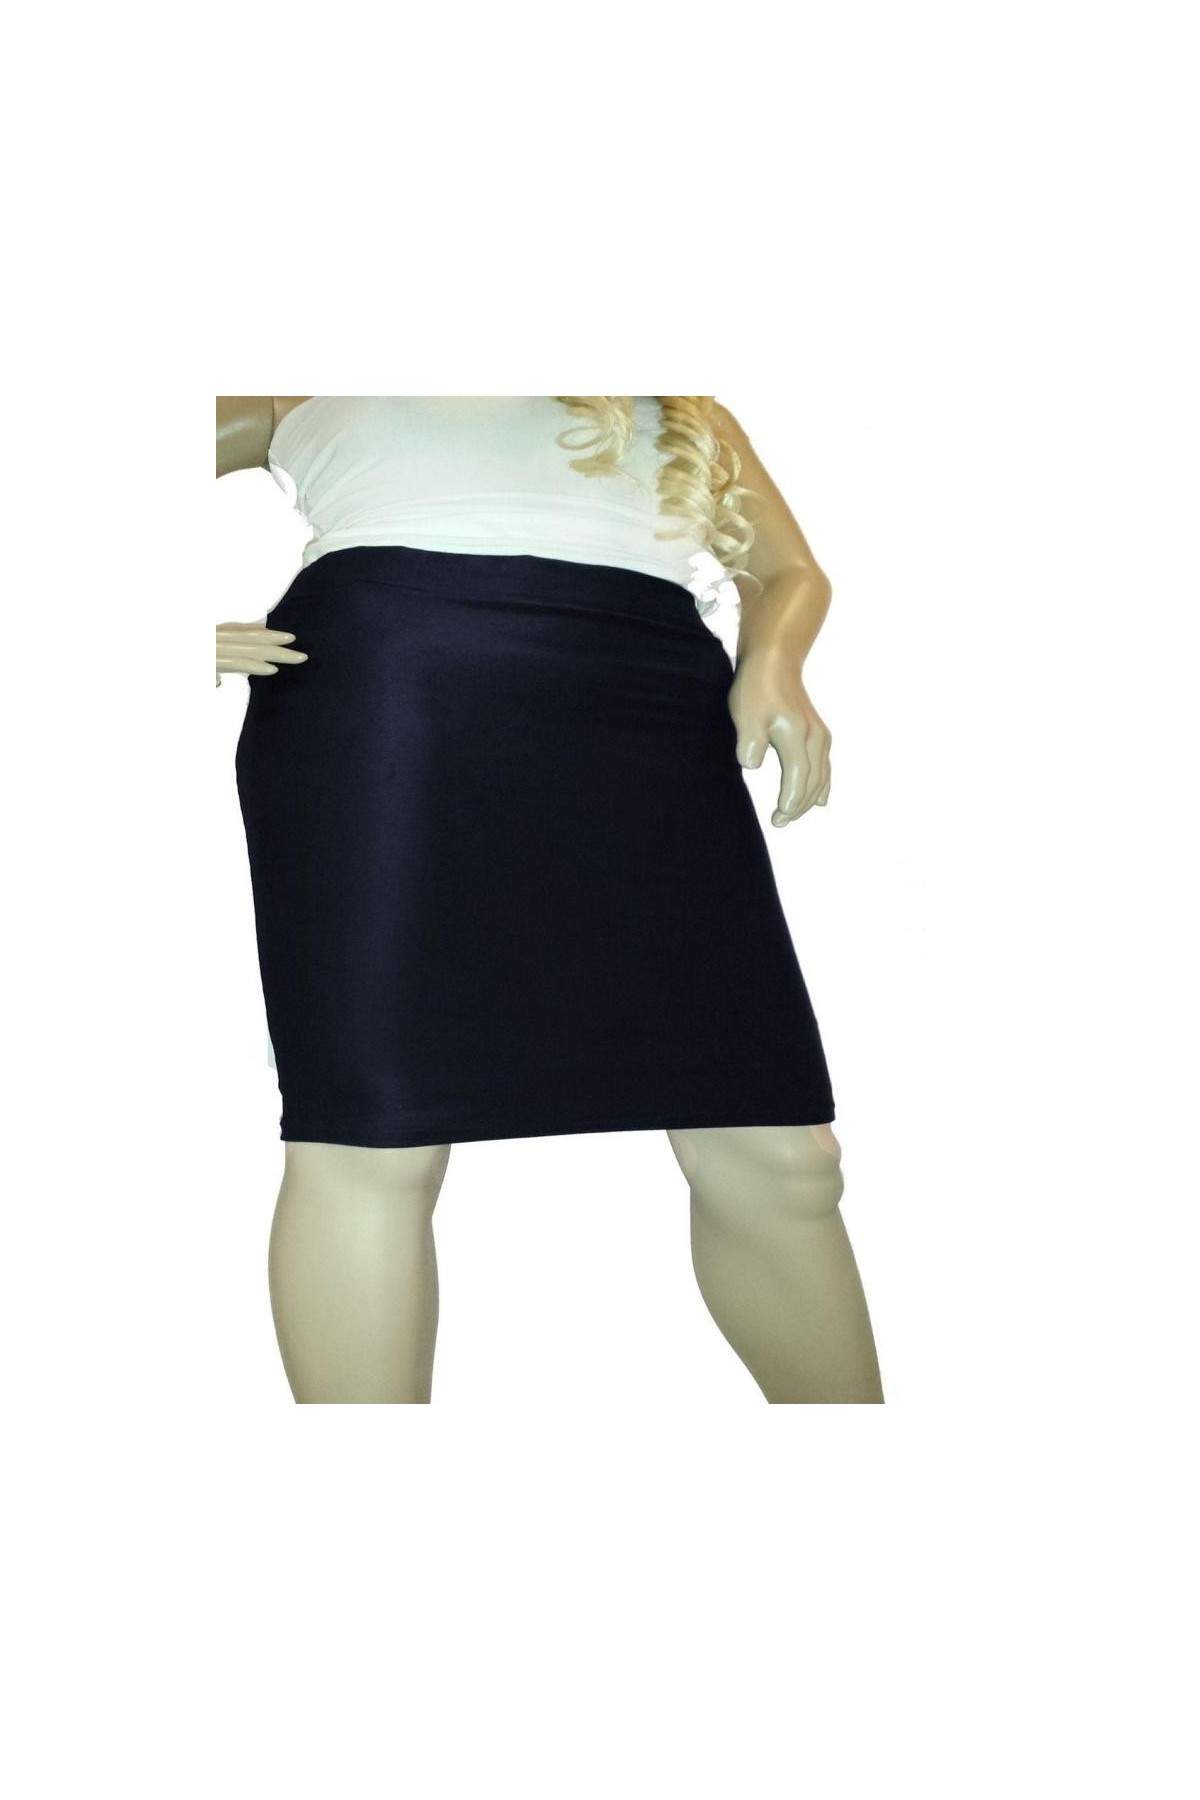 Save 15 percent on Blue Stretch Skirt Knee Length Sizes 44 - 52 - 